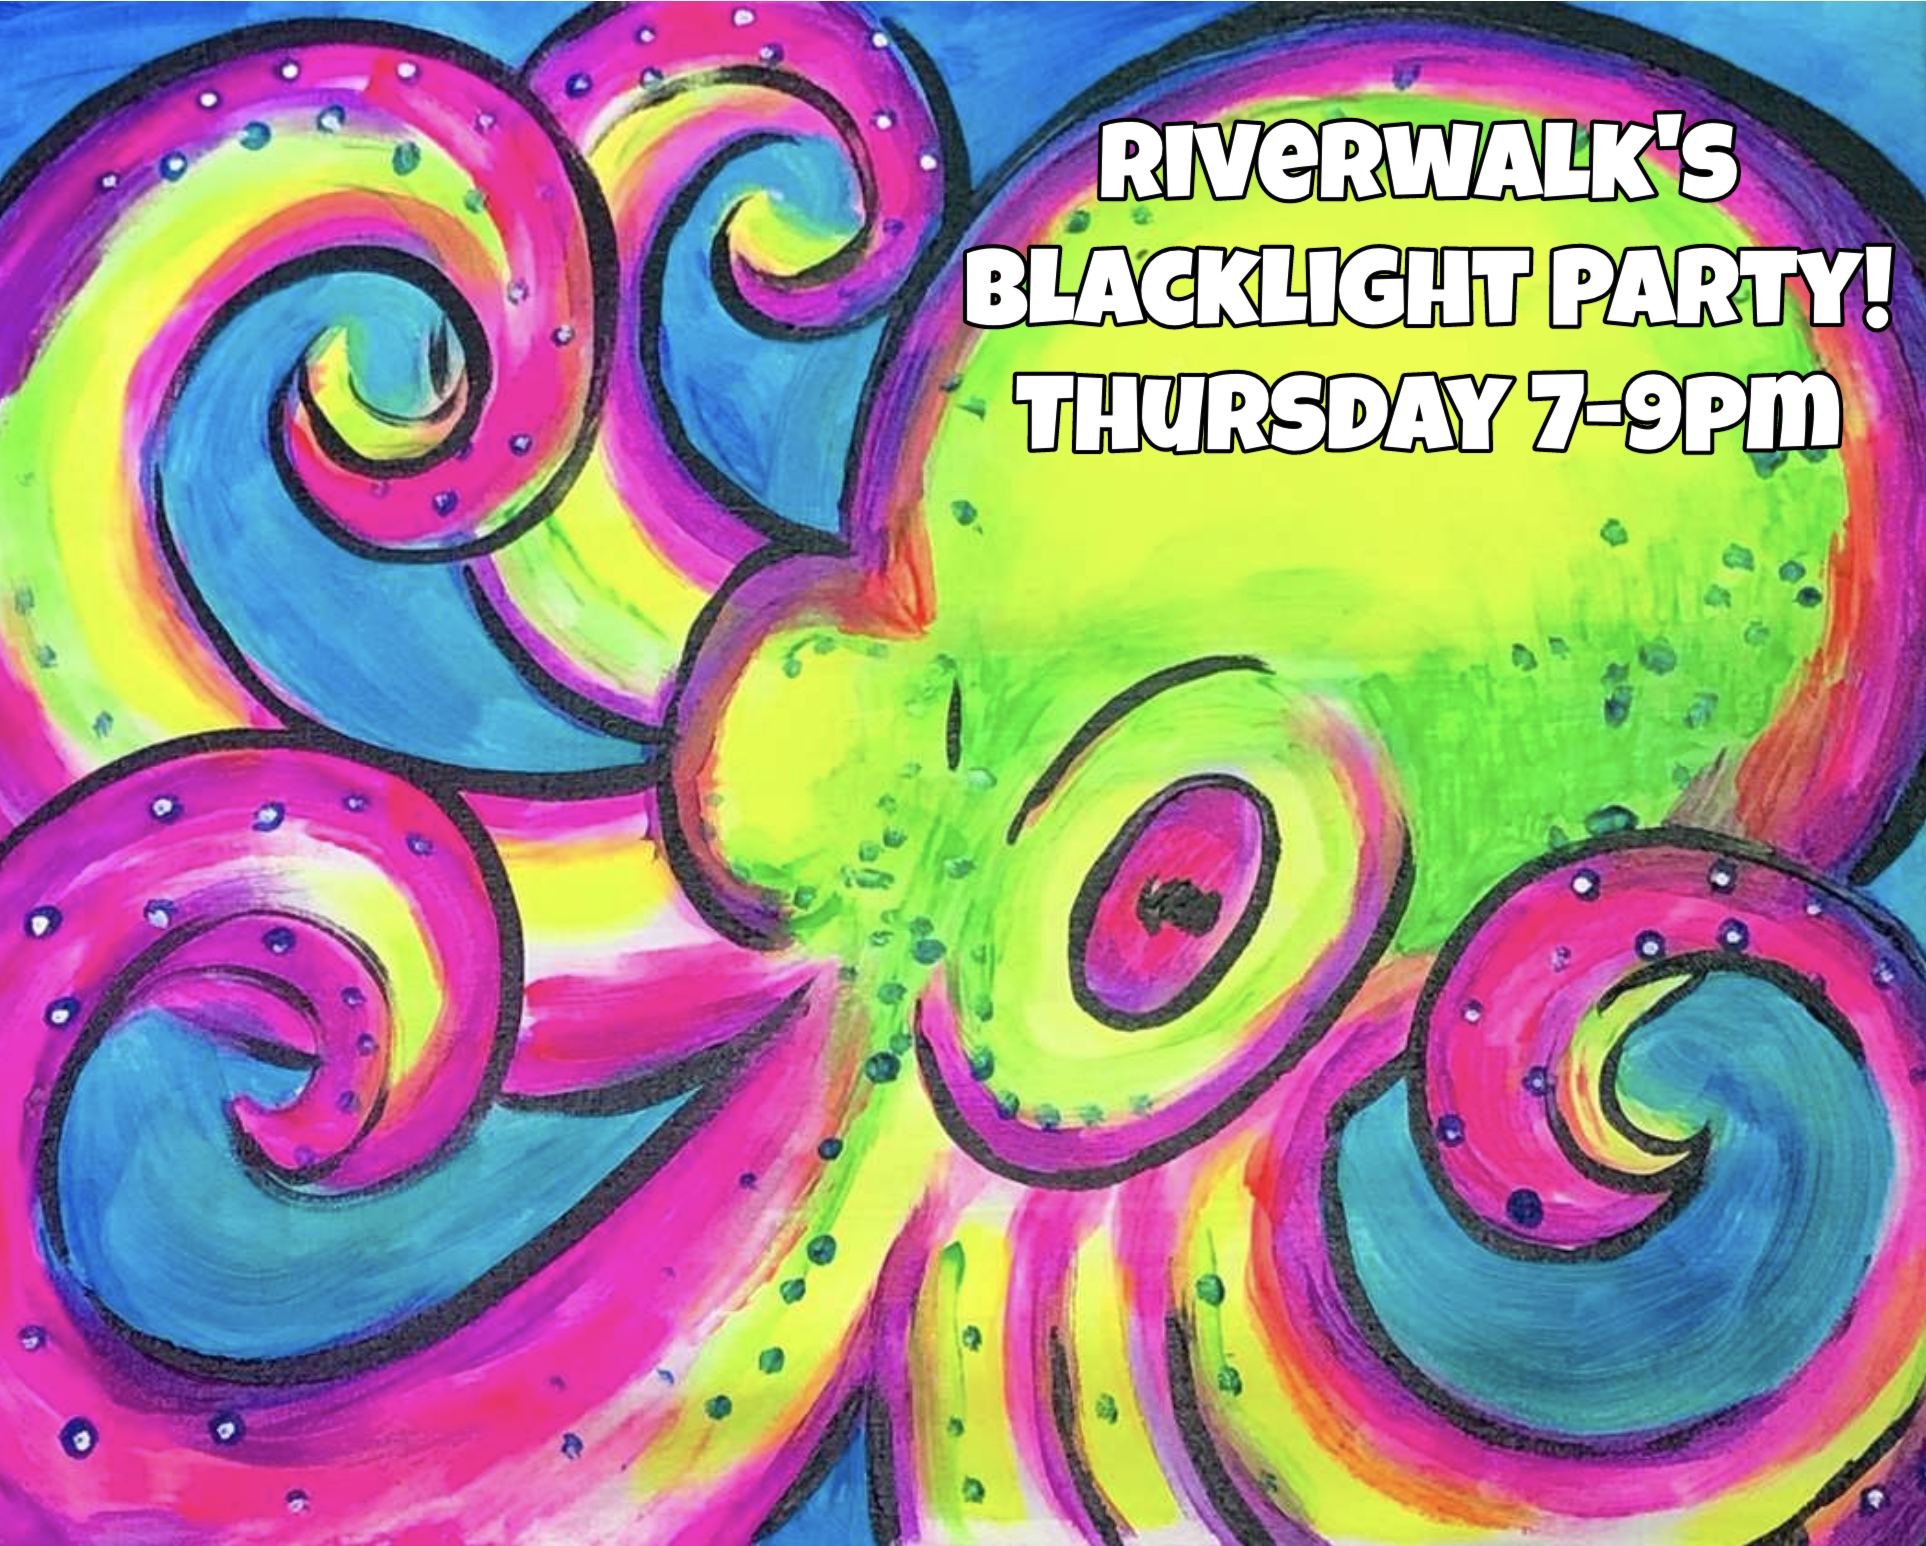 PGA Who? Come paint at Riverwalk